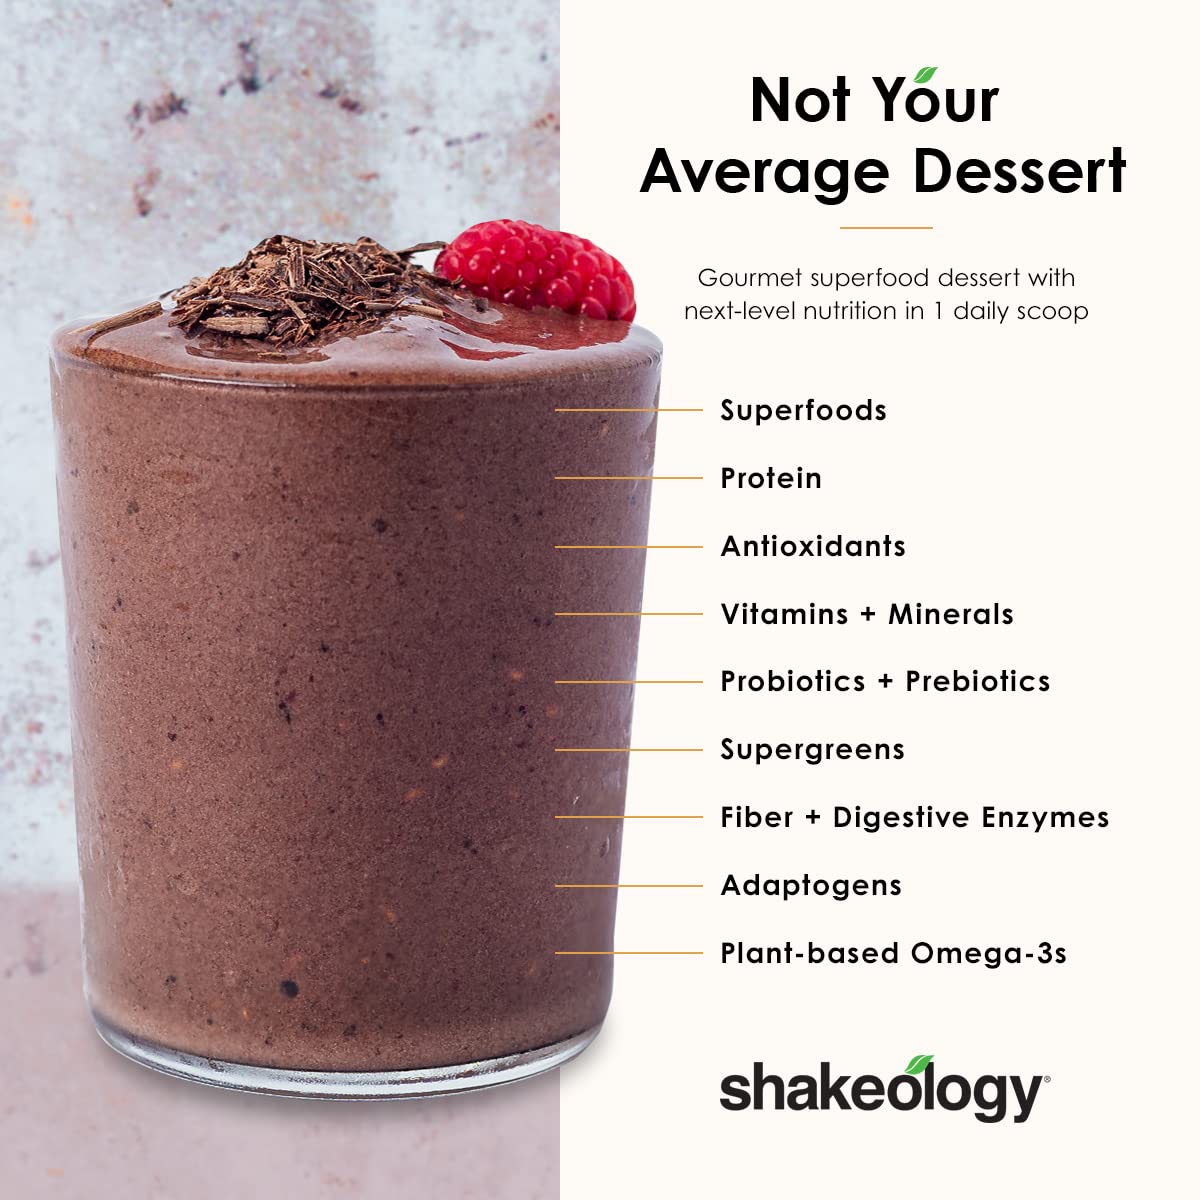 Shakeology Healthy Dessert powder, Superfood Meal Shake with Whey Protein, Probiotics, Adaptogens, and Vitamins (Chocolate, 30 day supply)